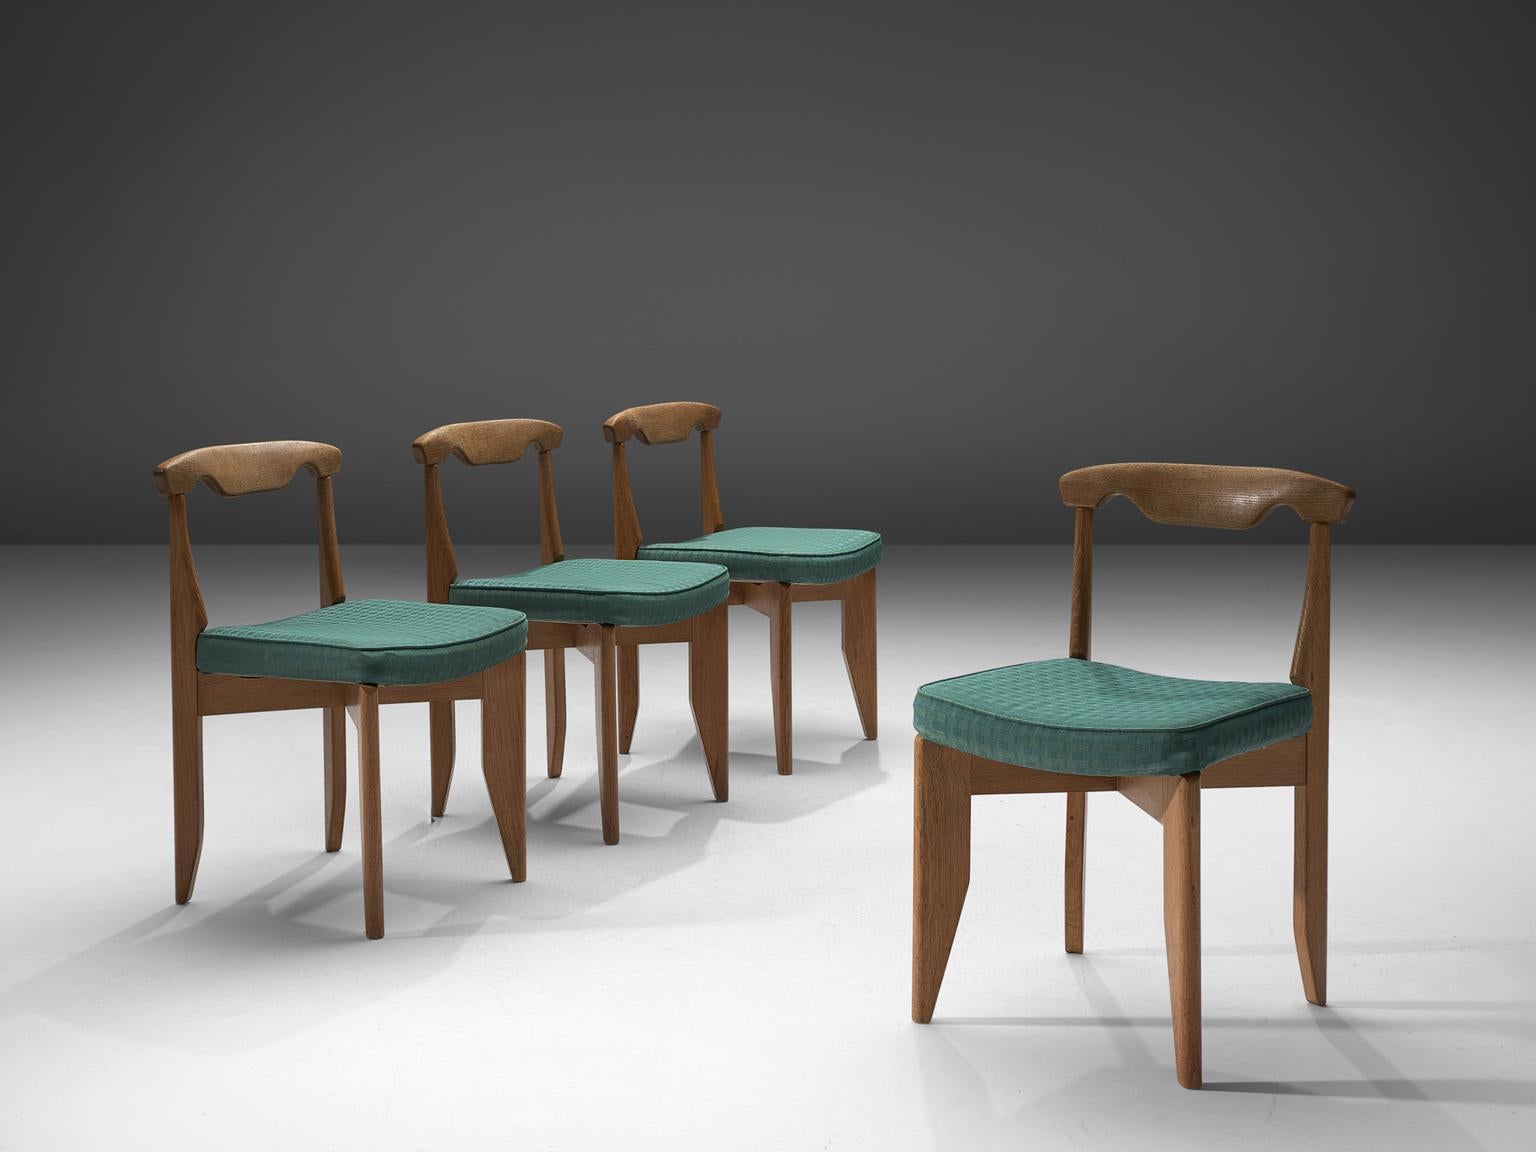 Guillerme et Chambron, set of four dining chairs, oak and green fabric, France, 1960s

These distinctive chairs in beautifully patinated oak is by the French designer duo Jacques Chambron (1914-2001) and Robert Guillerme (1913-1990). The dining